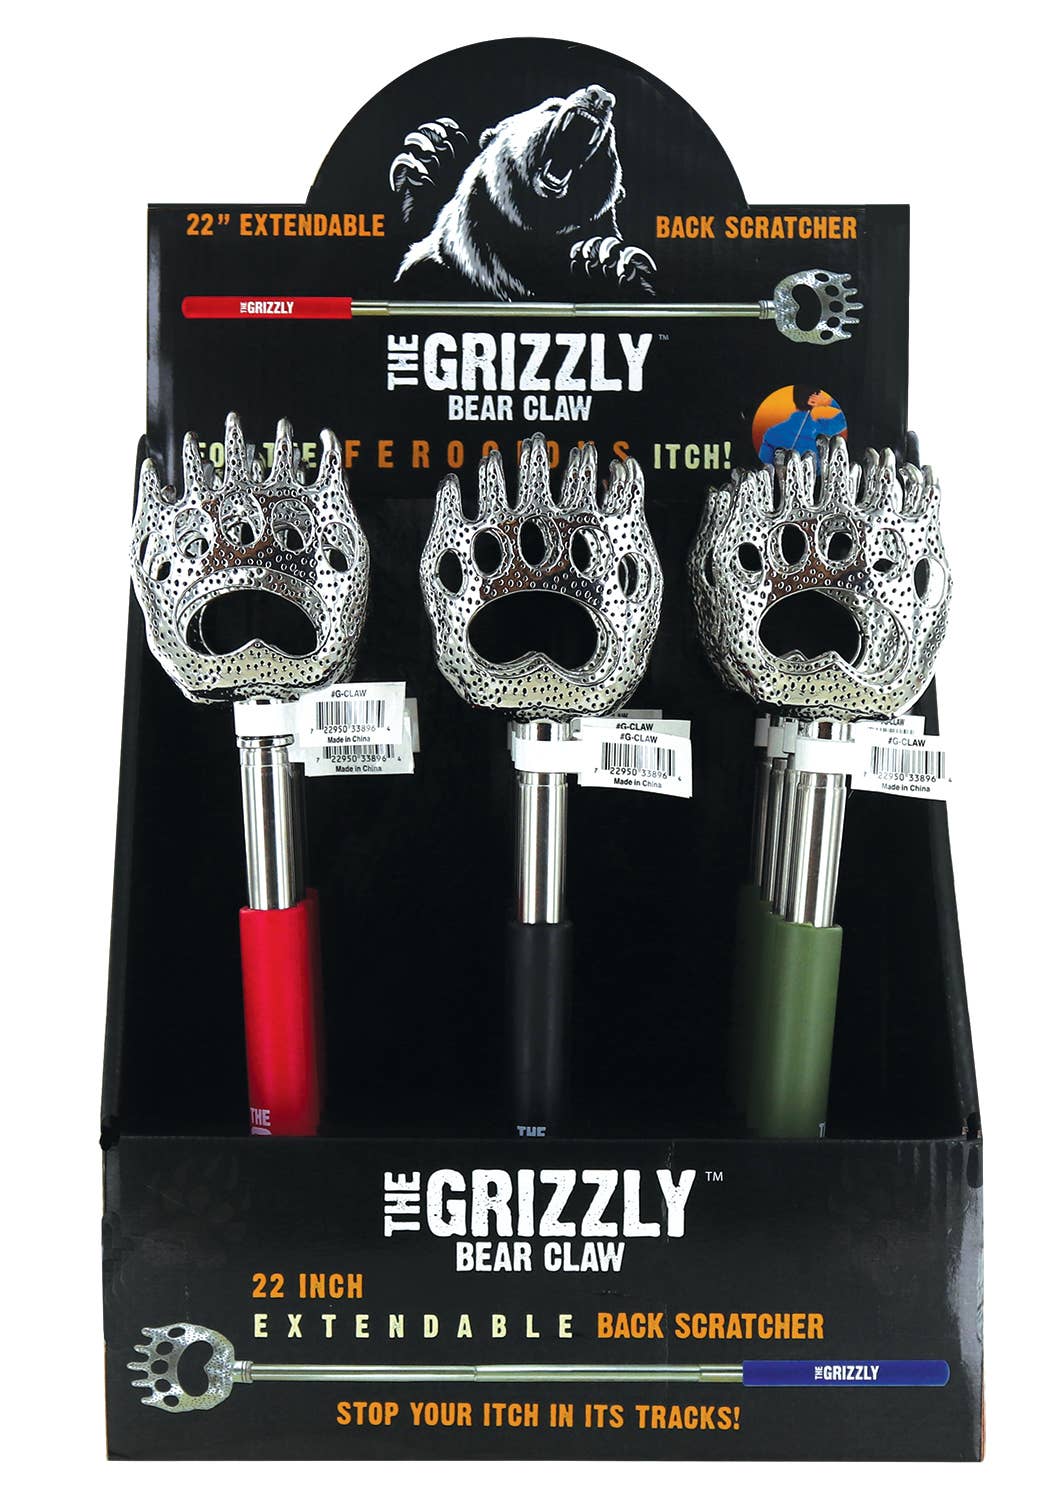 The Grizzly! Extendable Back Scratcher